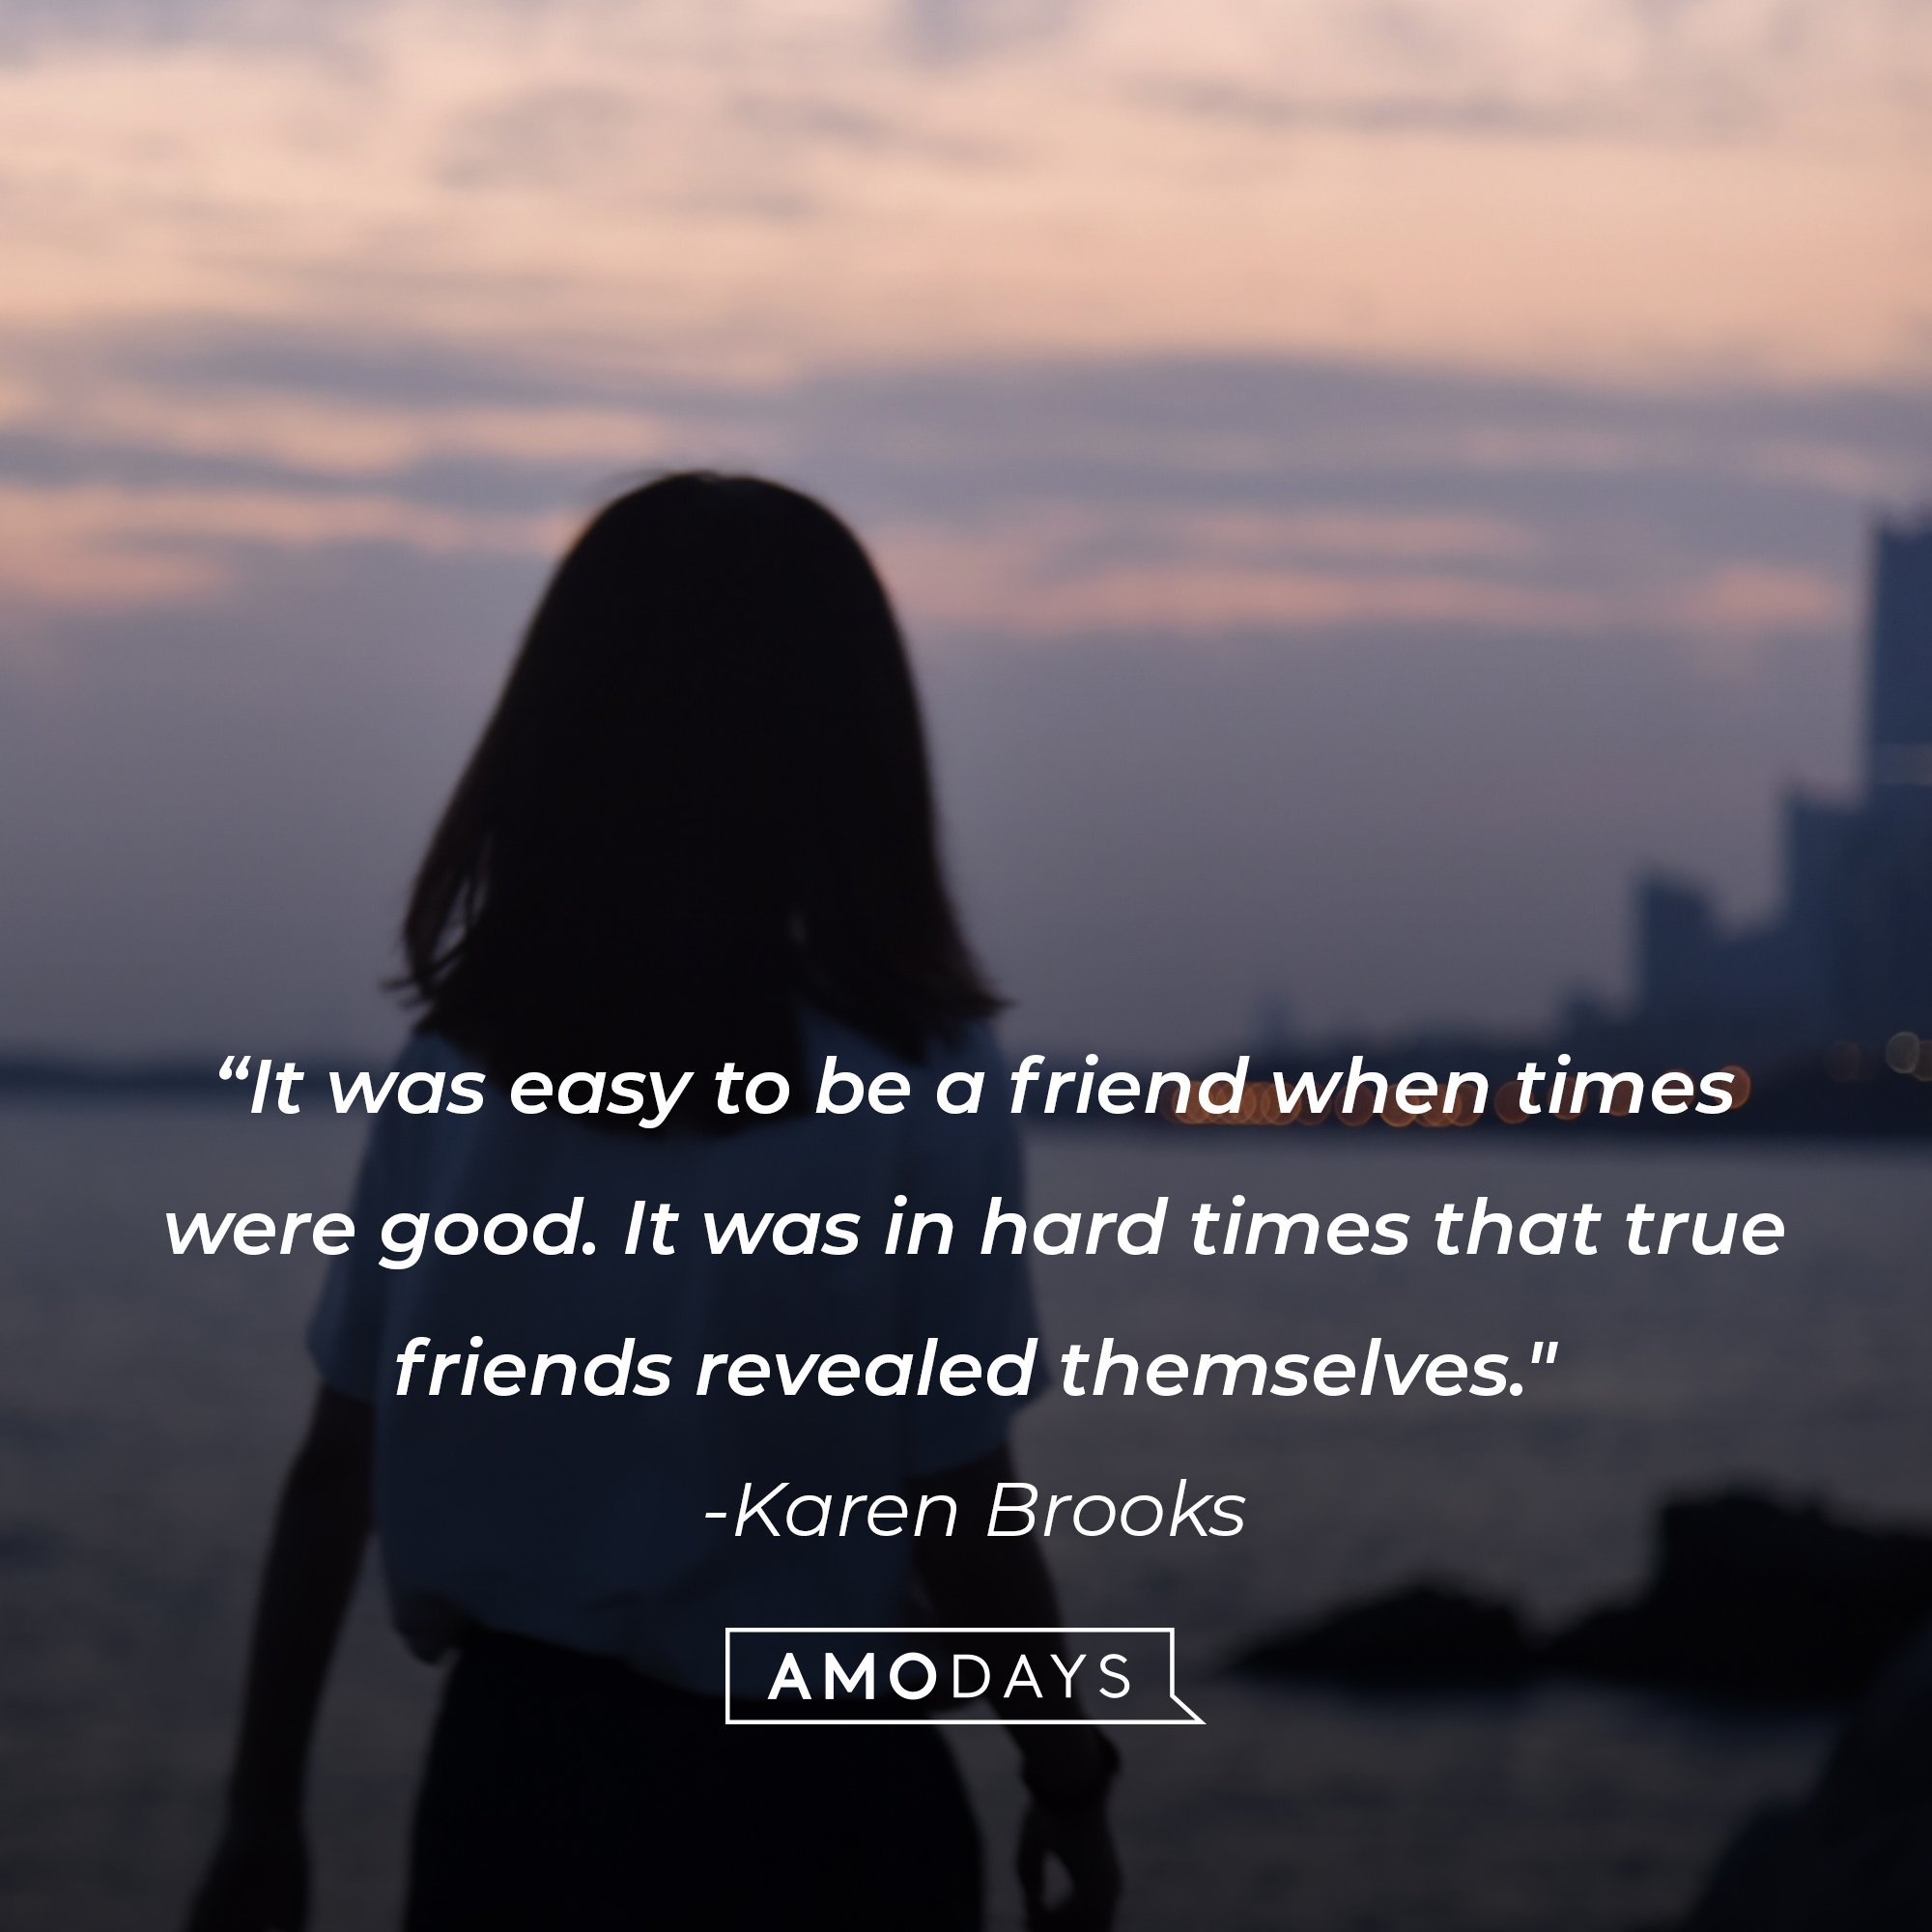  Karen Brooks’s quote: “It was easy to be a friend when times were good. It was in hard times that true friends revealed themselves. Their friendship had been forged in the hottest of fires and fused them into family.” | Image: AmoDays 